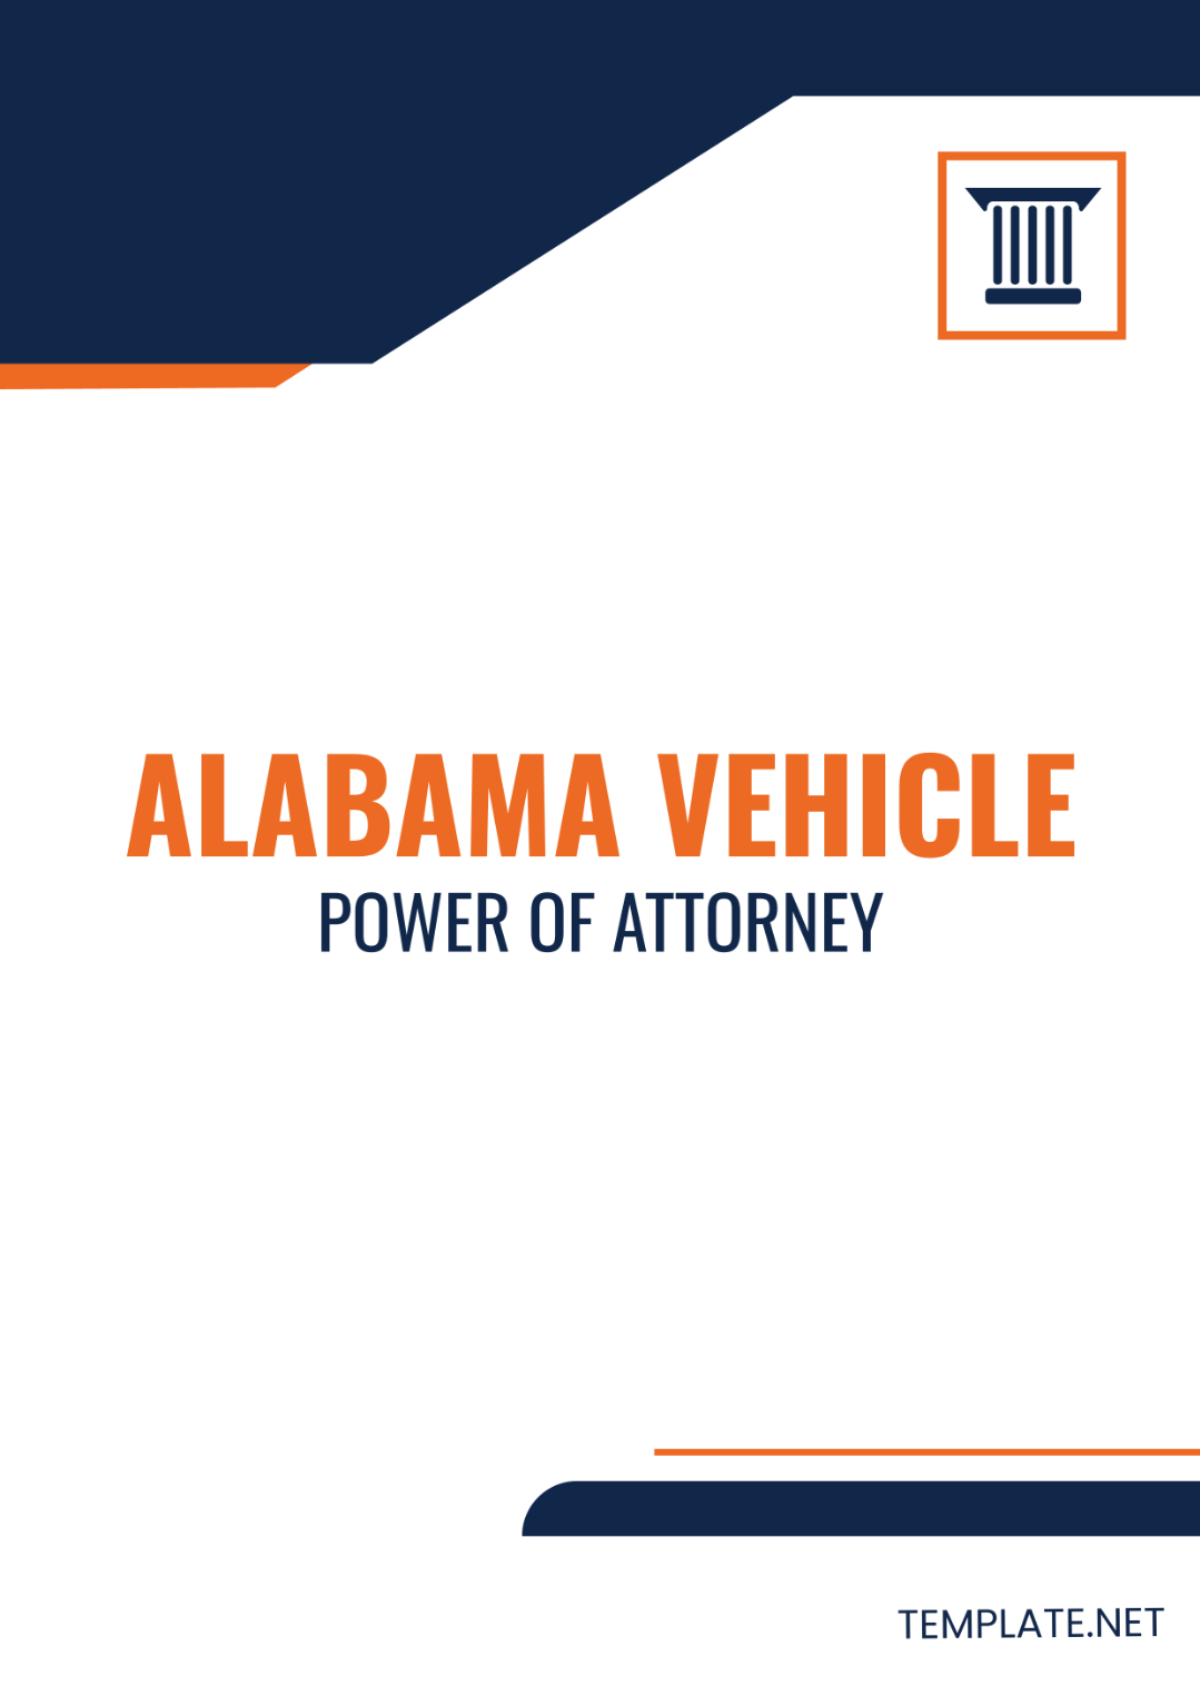 Alabama Vehicle Power of Attorney Template